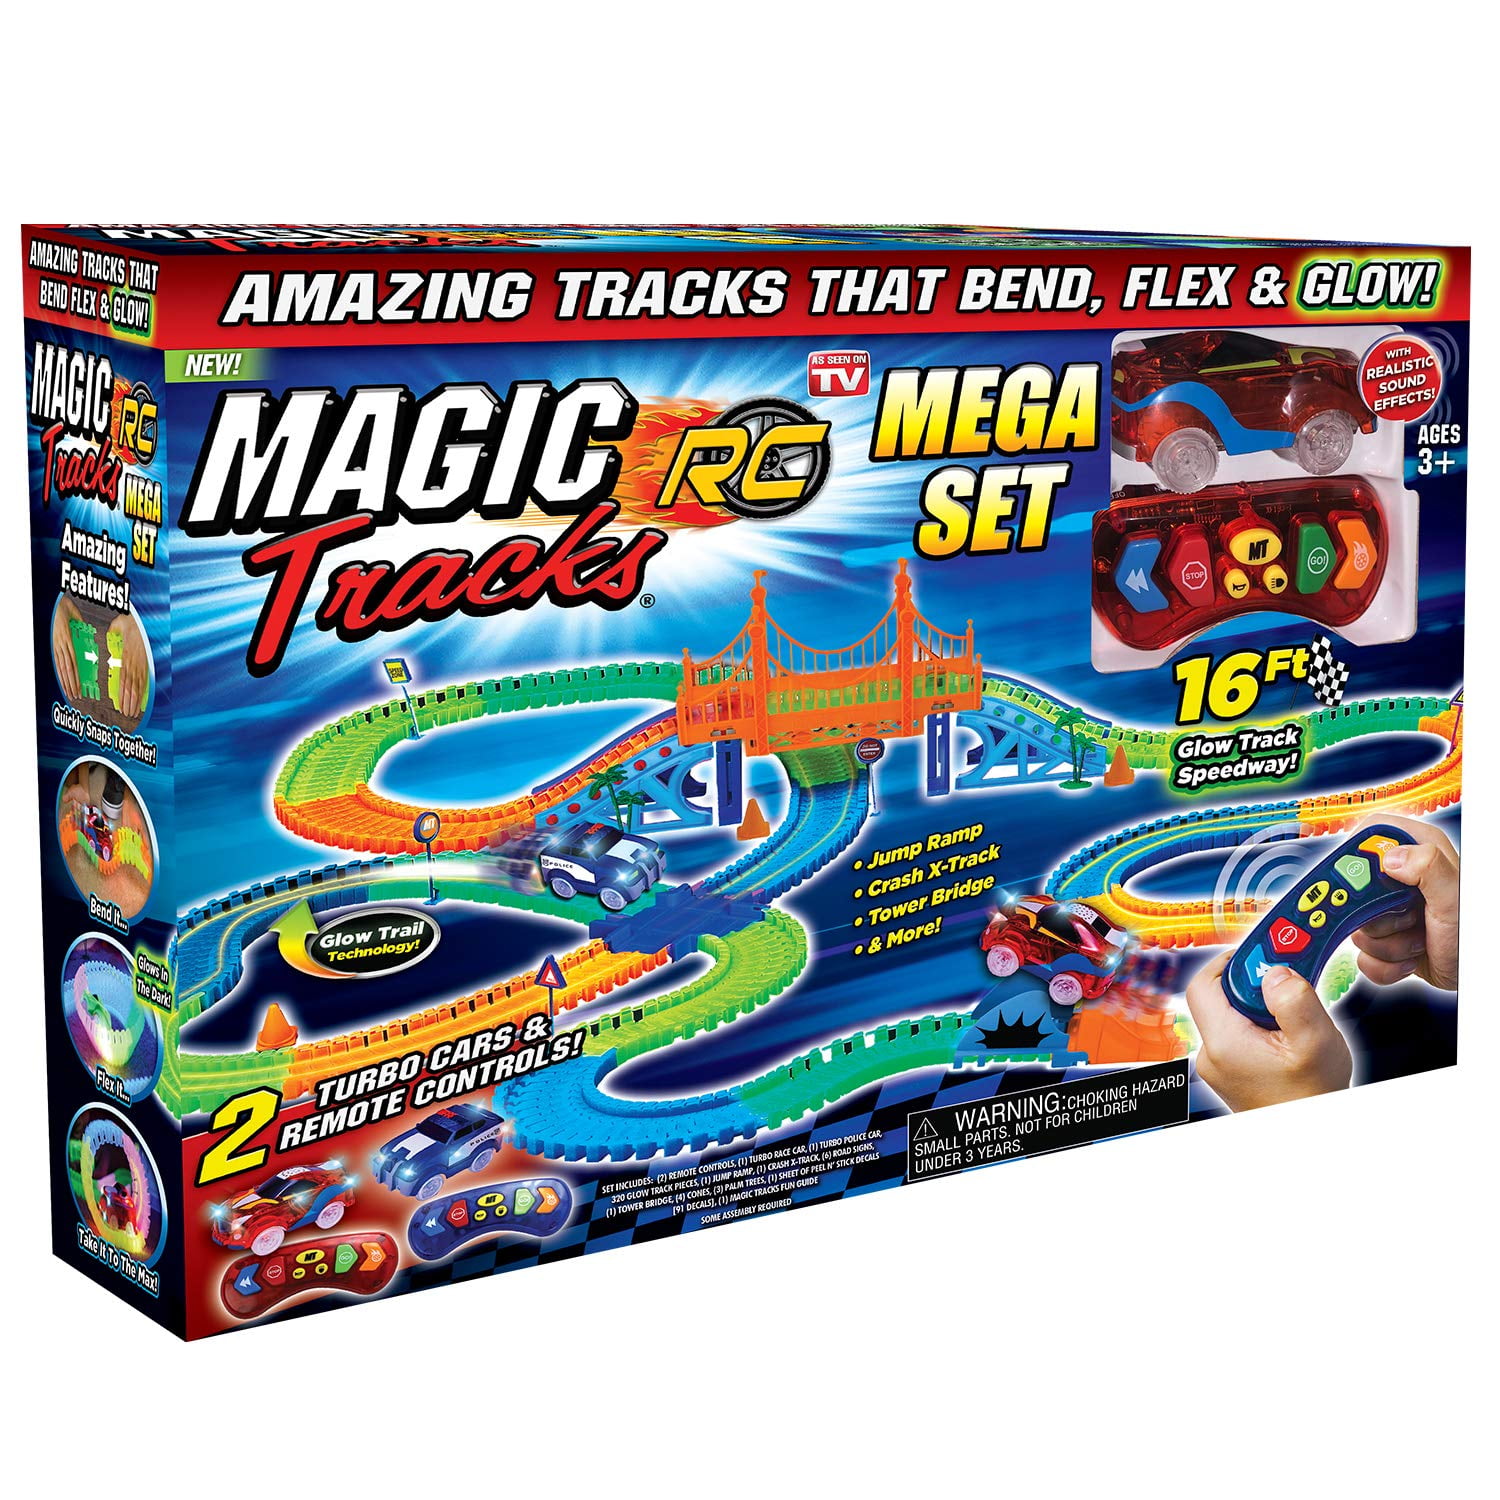 Bendable Glow in the Dark Racetrack As Seen on TV Ontel Magic Tracks Mega Xtreme with 2 Race Car and 18 ft of Flexible 